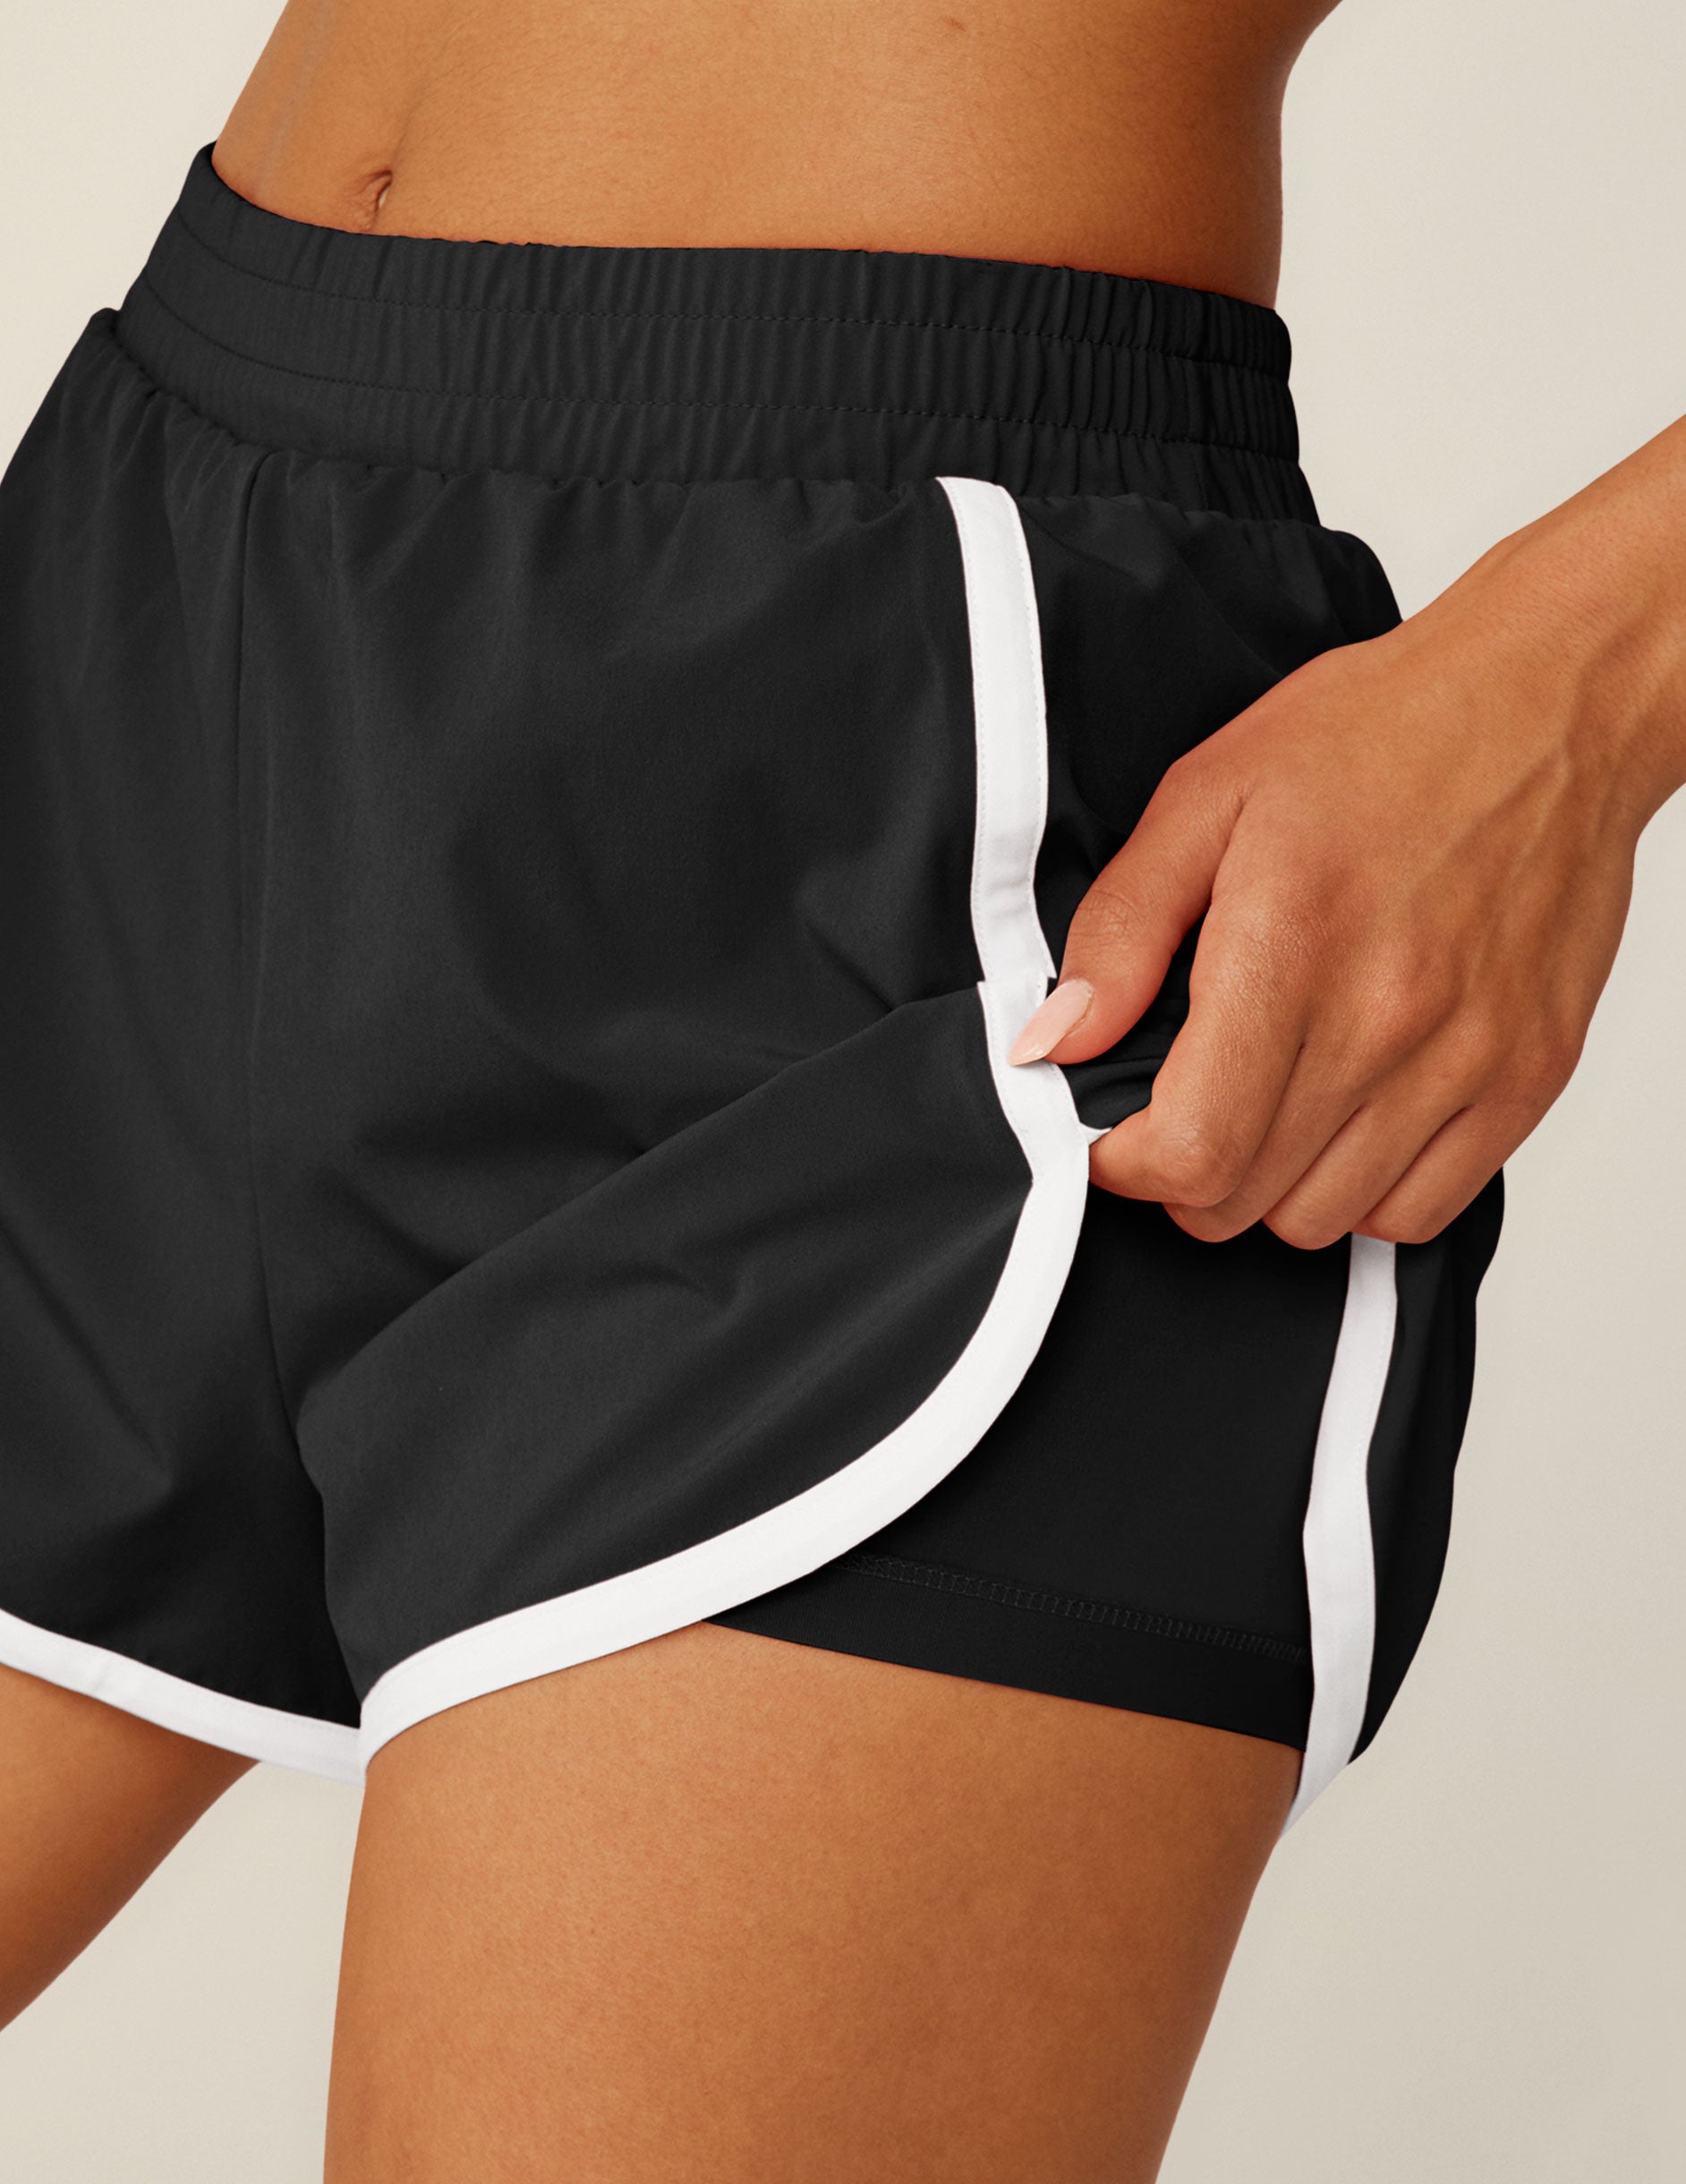 black classic length shorts with white lining. 